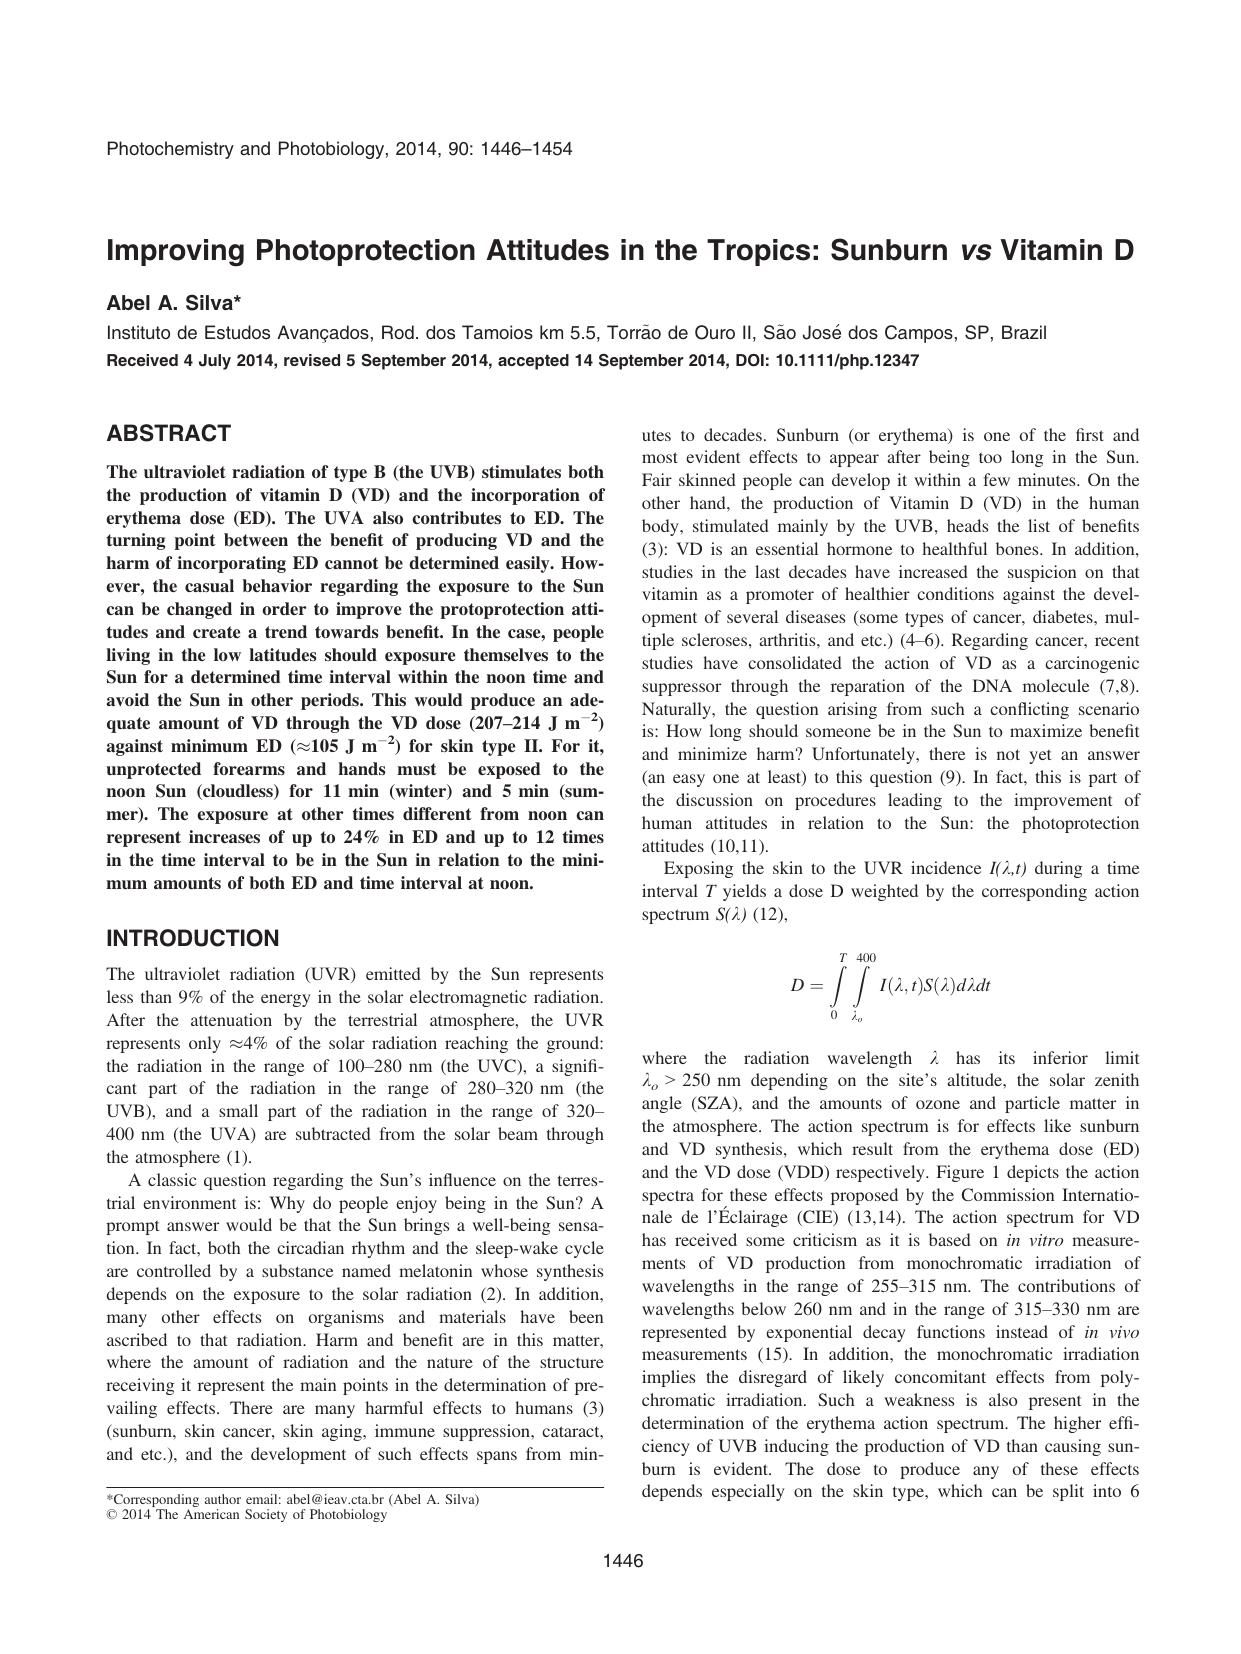 Improving Photoprotection Attitudes in the Tropics: Sunburn vs Vitamin D by Unknown